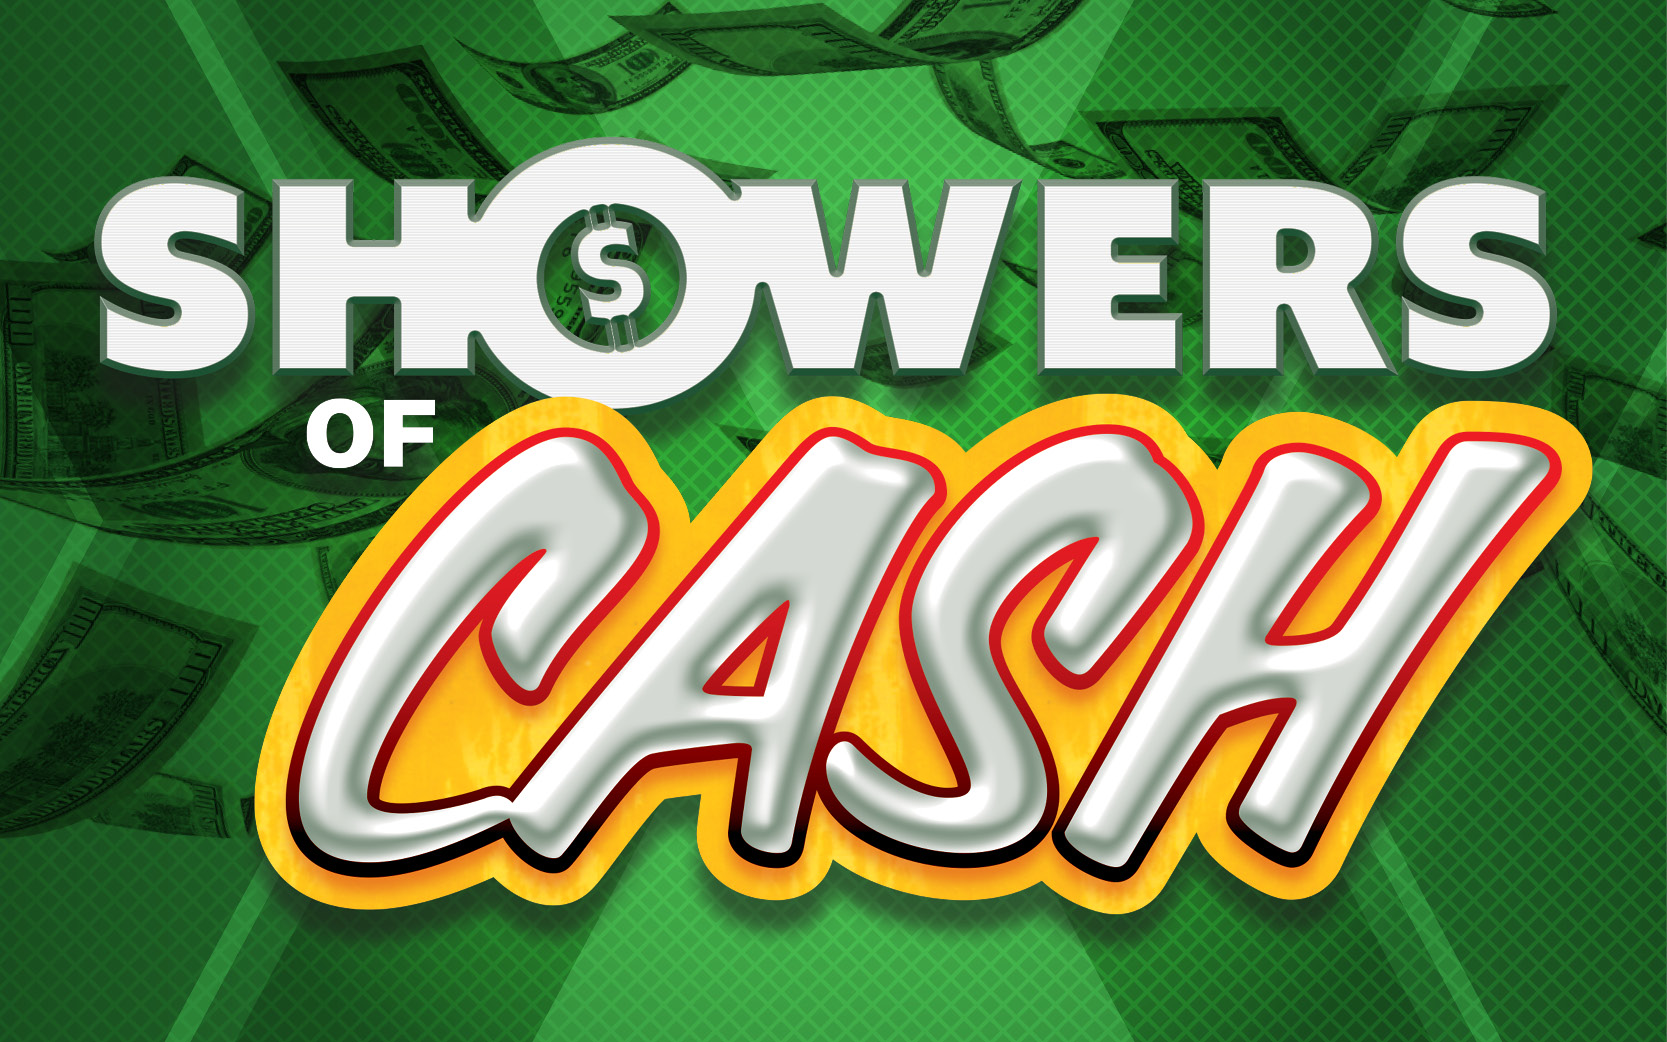 Showers of Cash